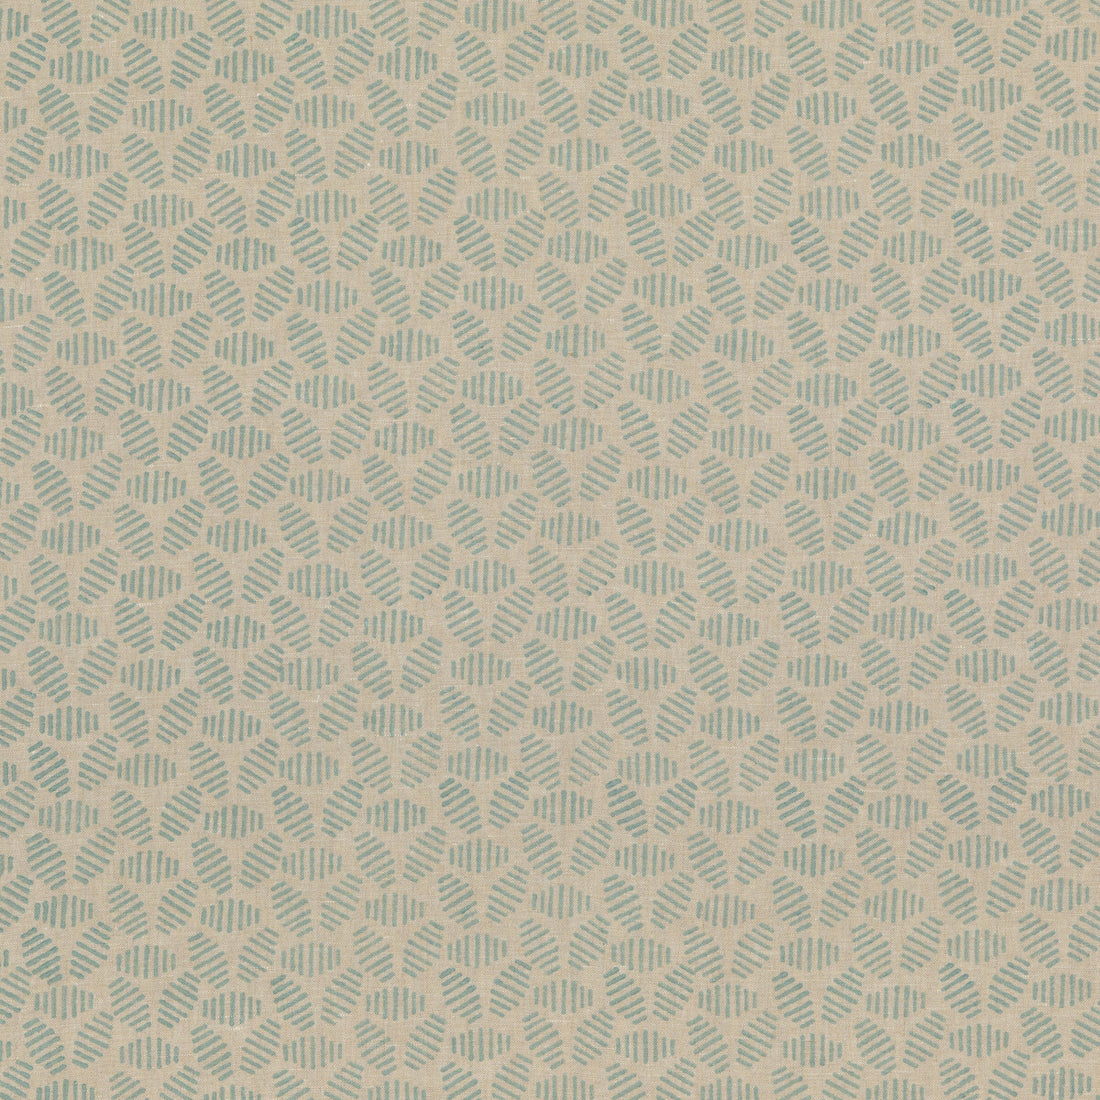 Bumble Bee fabric in aqua color - pattern PP50482.3.0 - by Baker Lifestyle in the Block Party collection